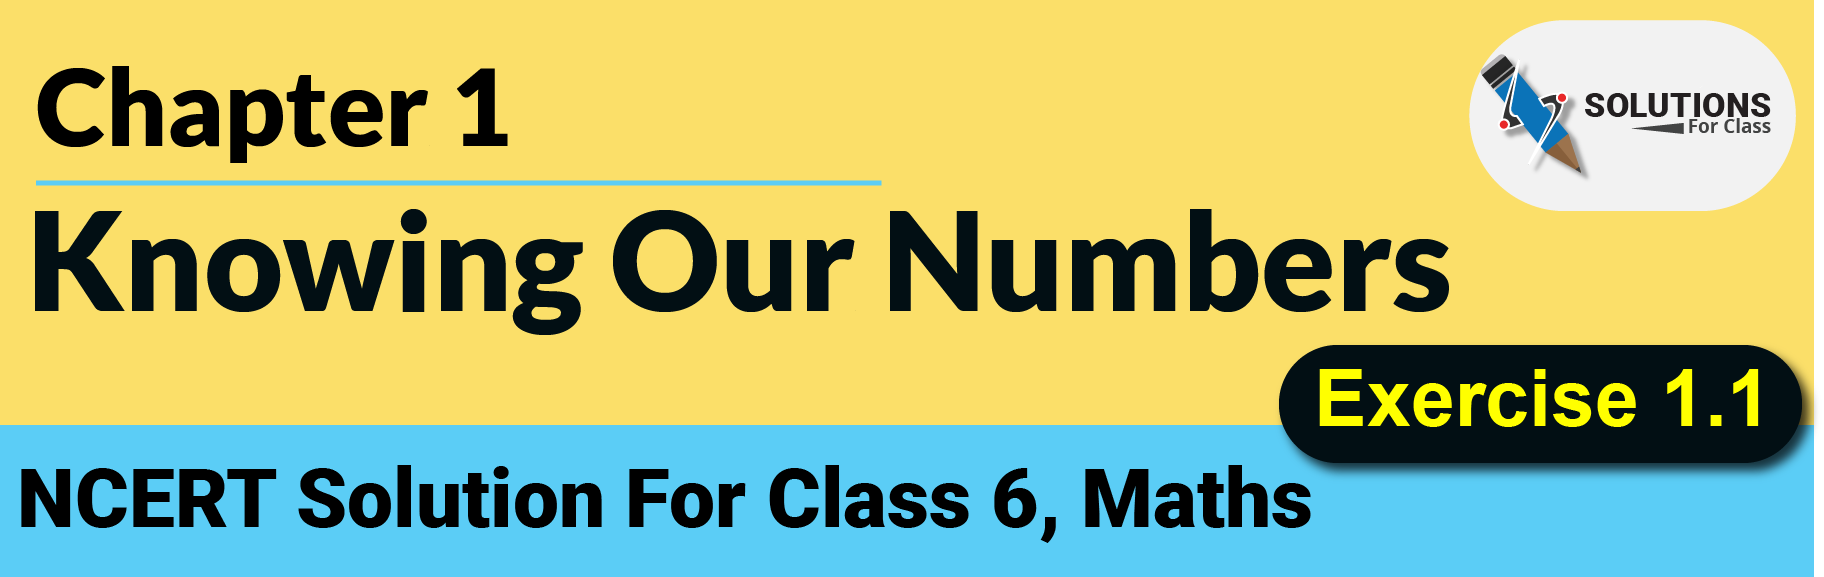 NCERT Solution For Class 6, Maths, Chapter 1, Knowing Our Numbers, ex. 1.1